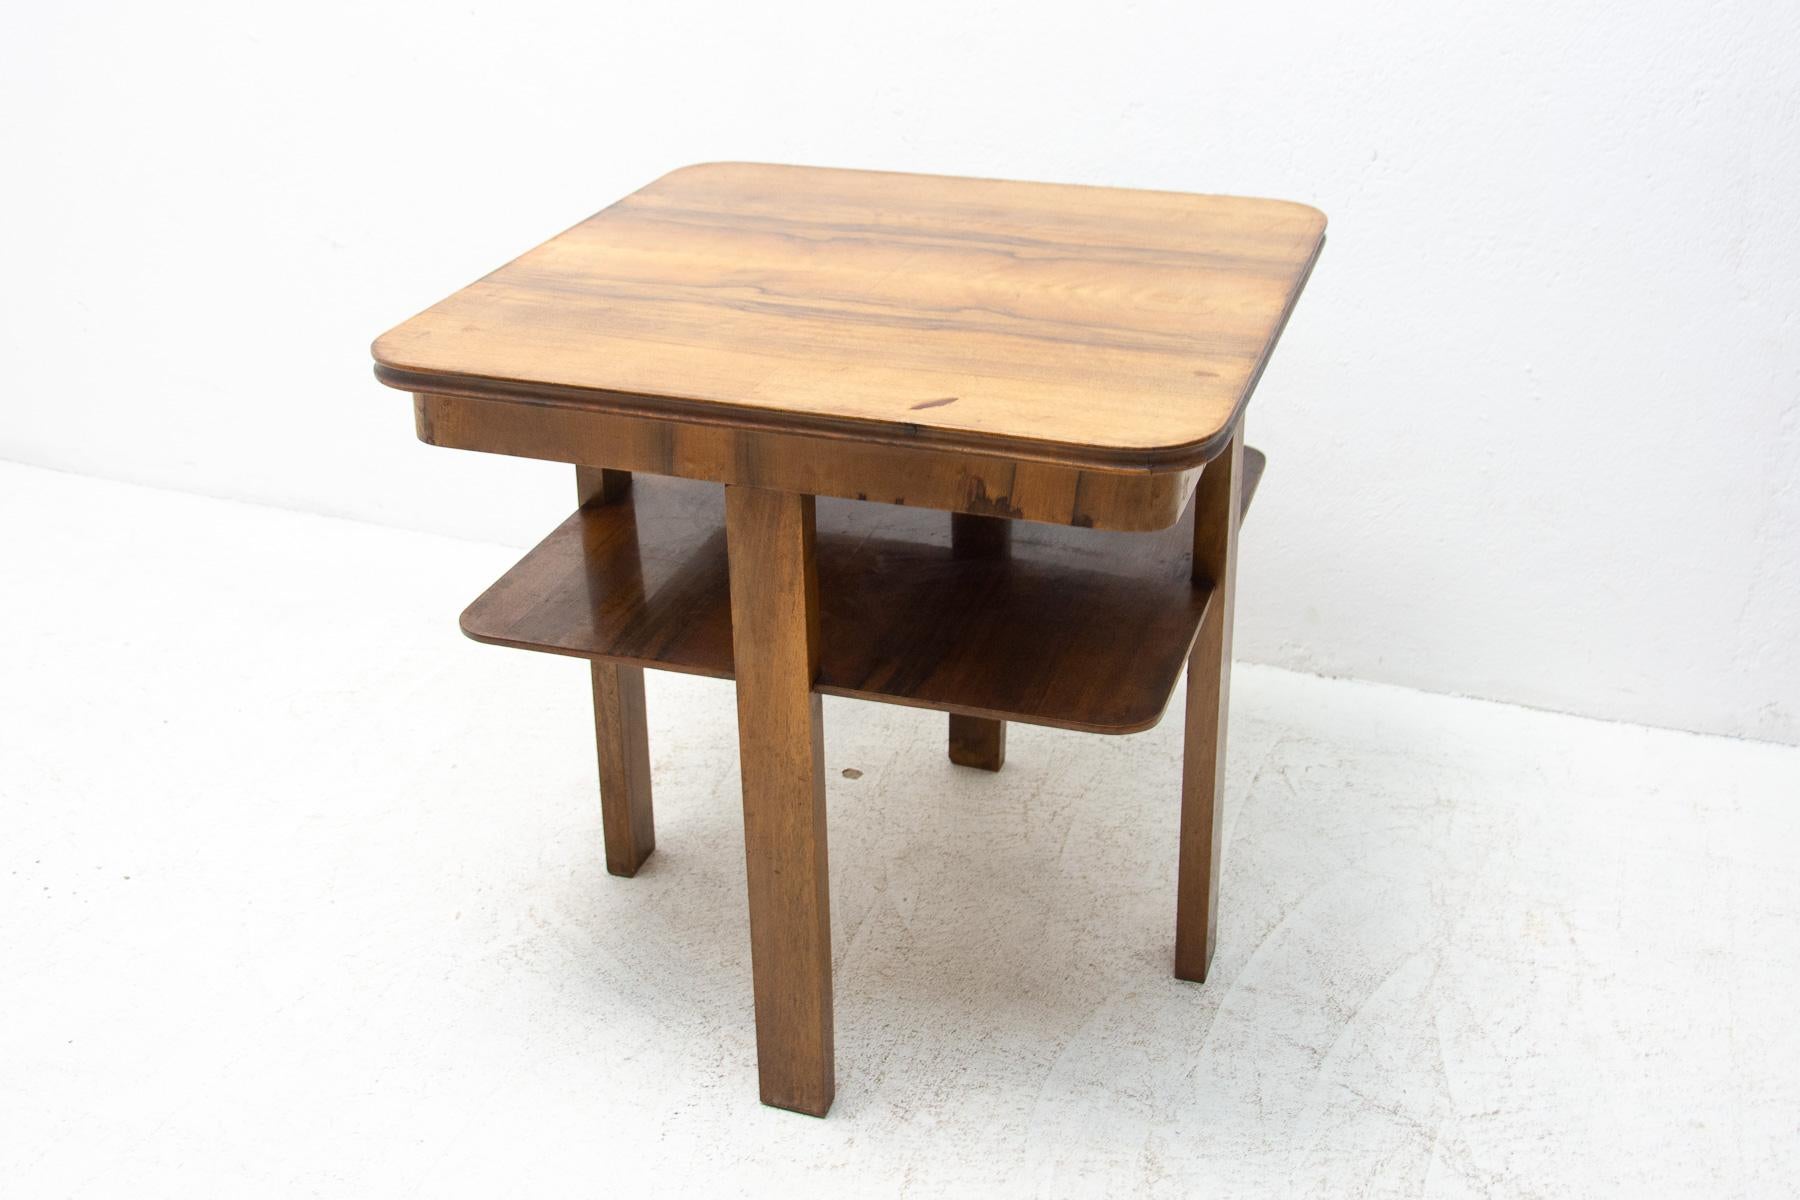 Art Deco central table, made in Bohemia in 1930´s. Very beautiful design of table legs. It's veneered by the burl walnut veneer. In very good Vintage condition, bears signs of age and using.

Measures: height: 71 cm

Width: 71 cm

Depth: 71 cm.